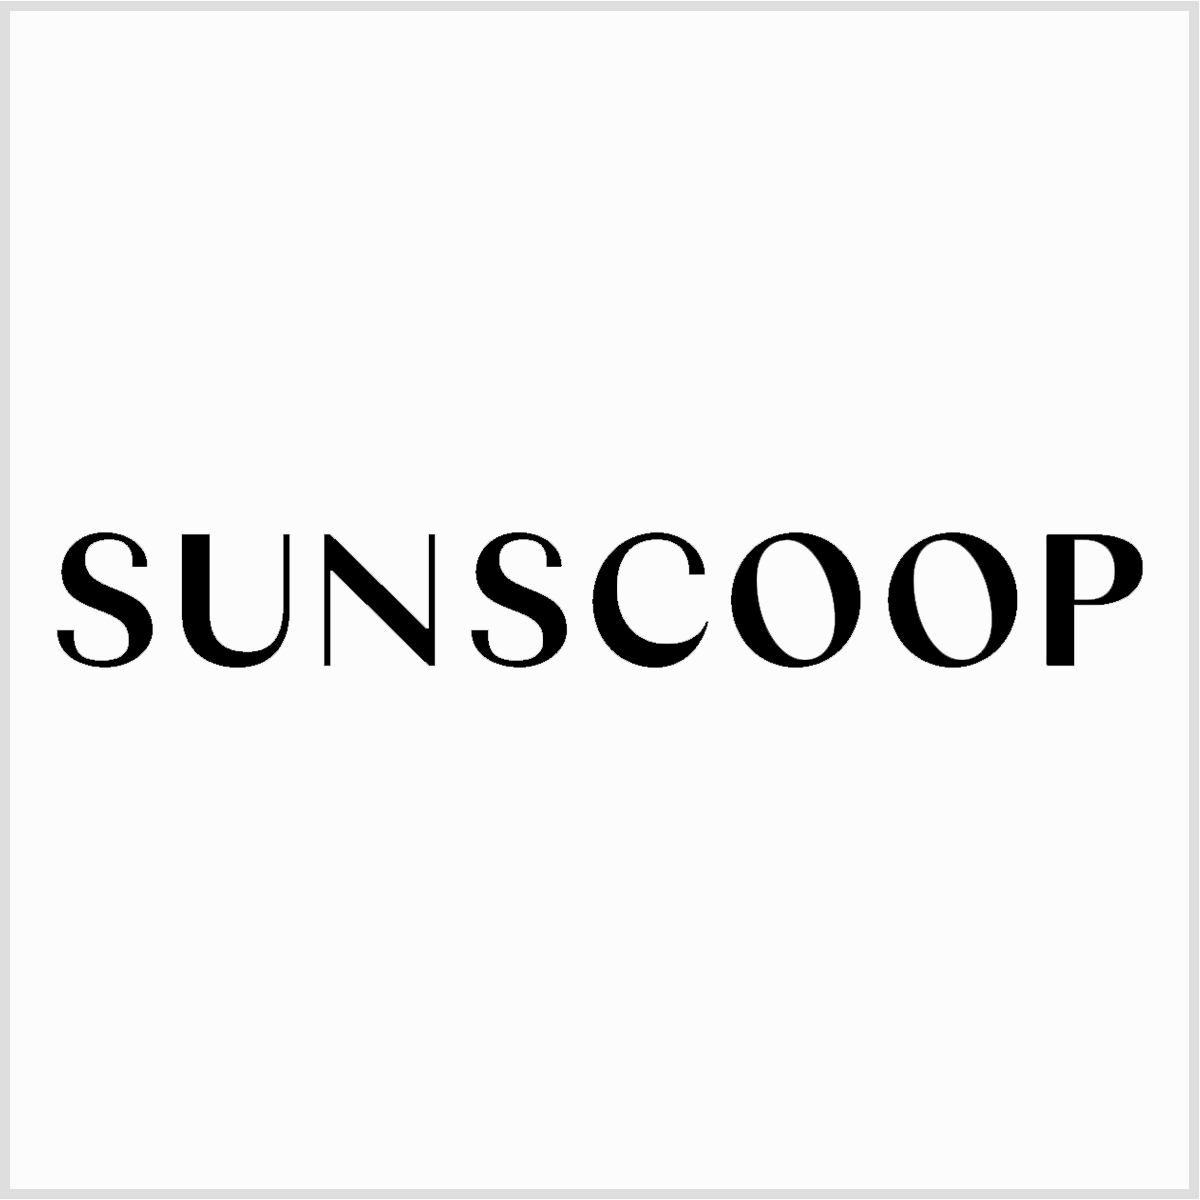 sunscoop.png